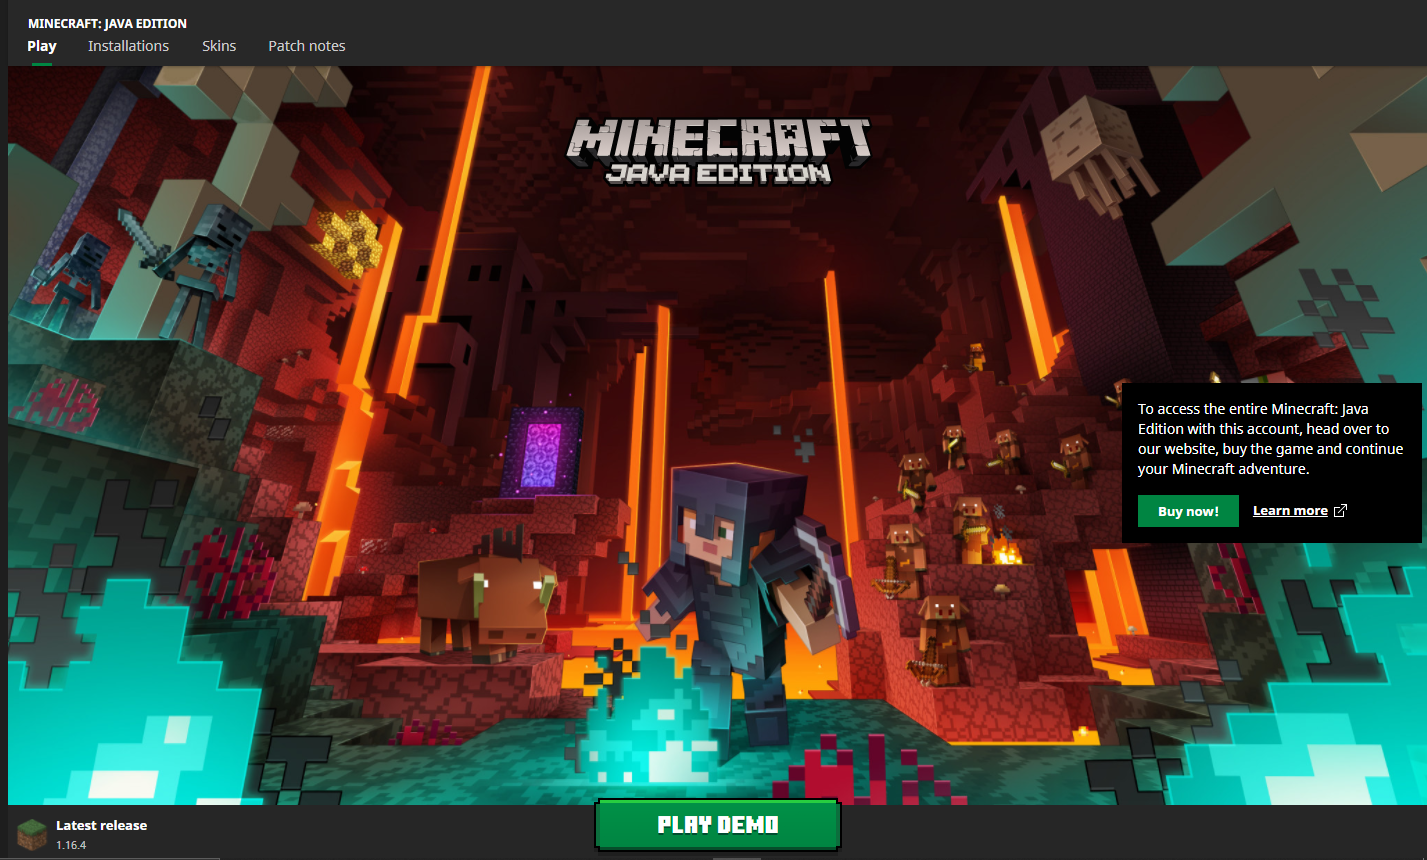 Play Minecraft Demo Mode FREE  NEW LAUNCHER 2017 ! ! ! 